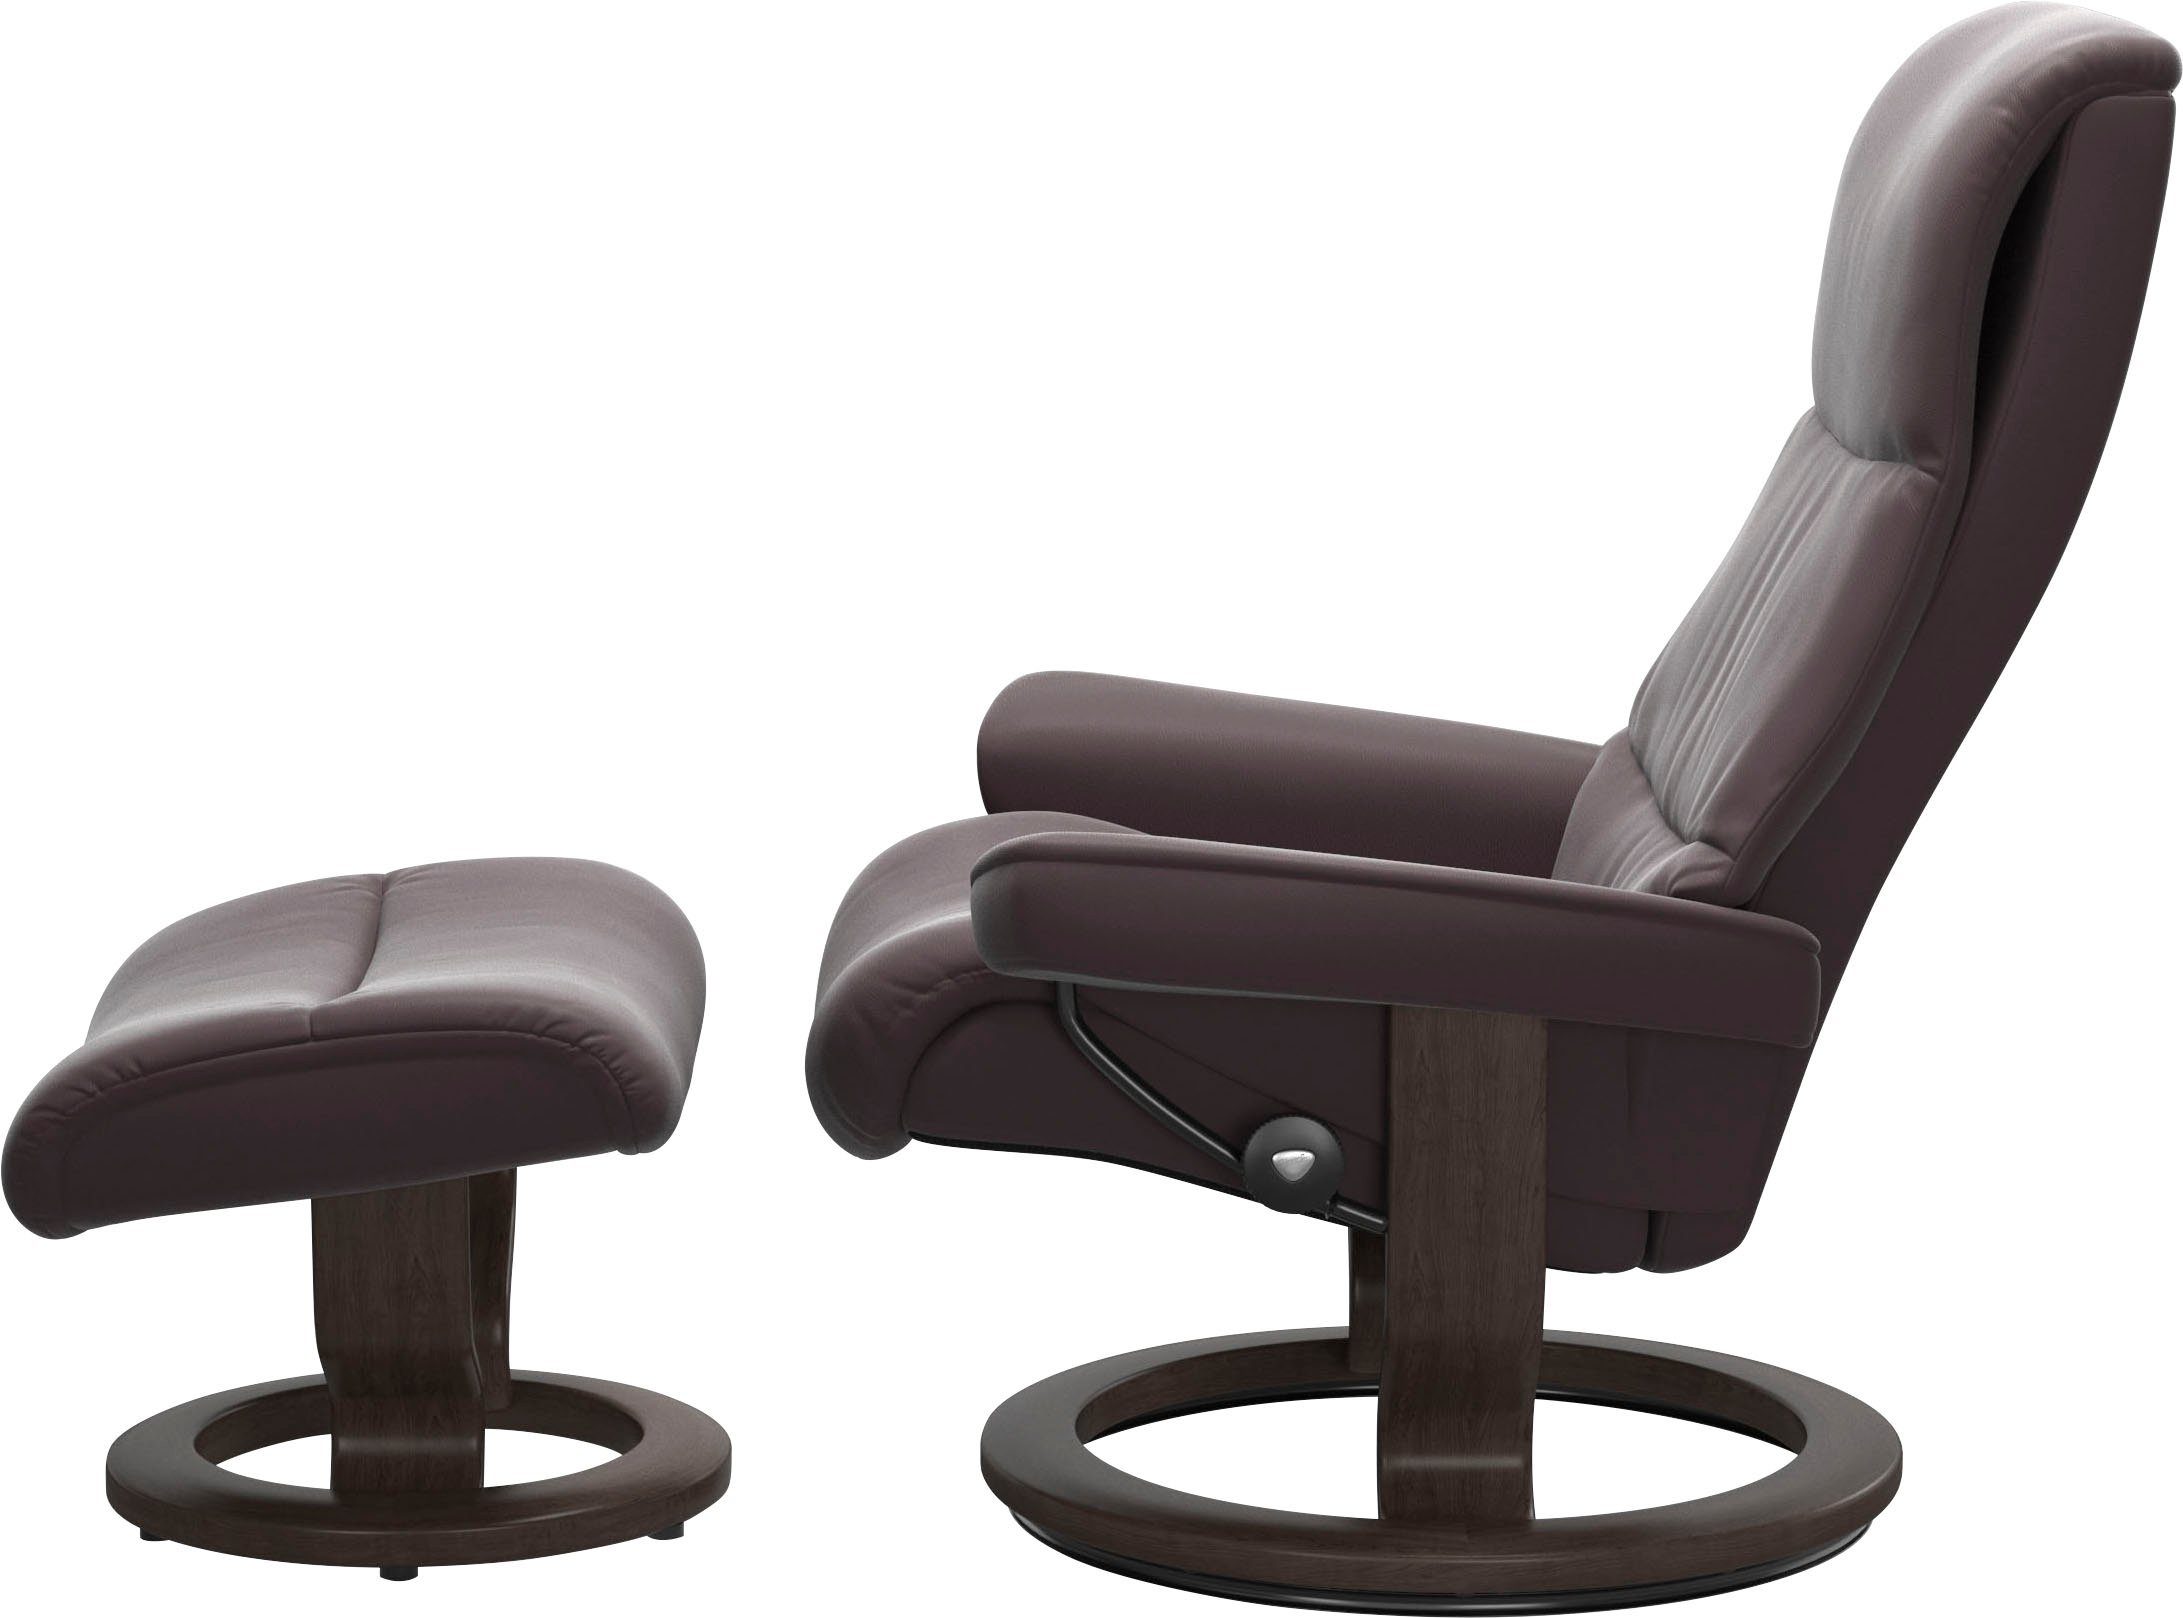 Classic Relaxsessel Größe S,Gestell Base, View, Stressless® Wenge mit